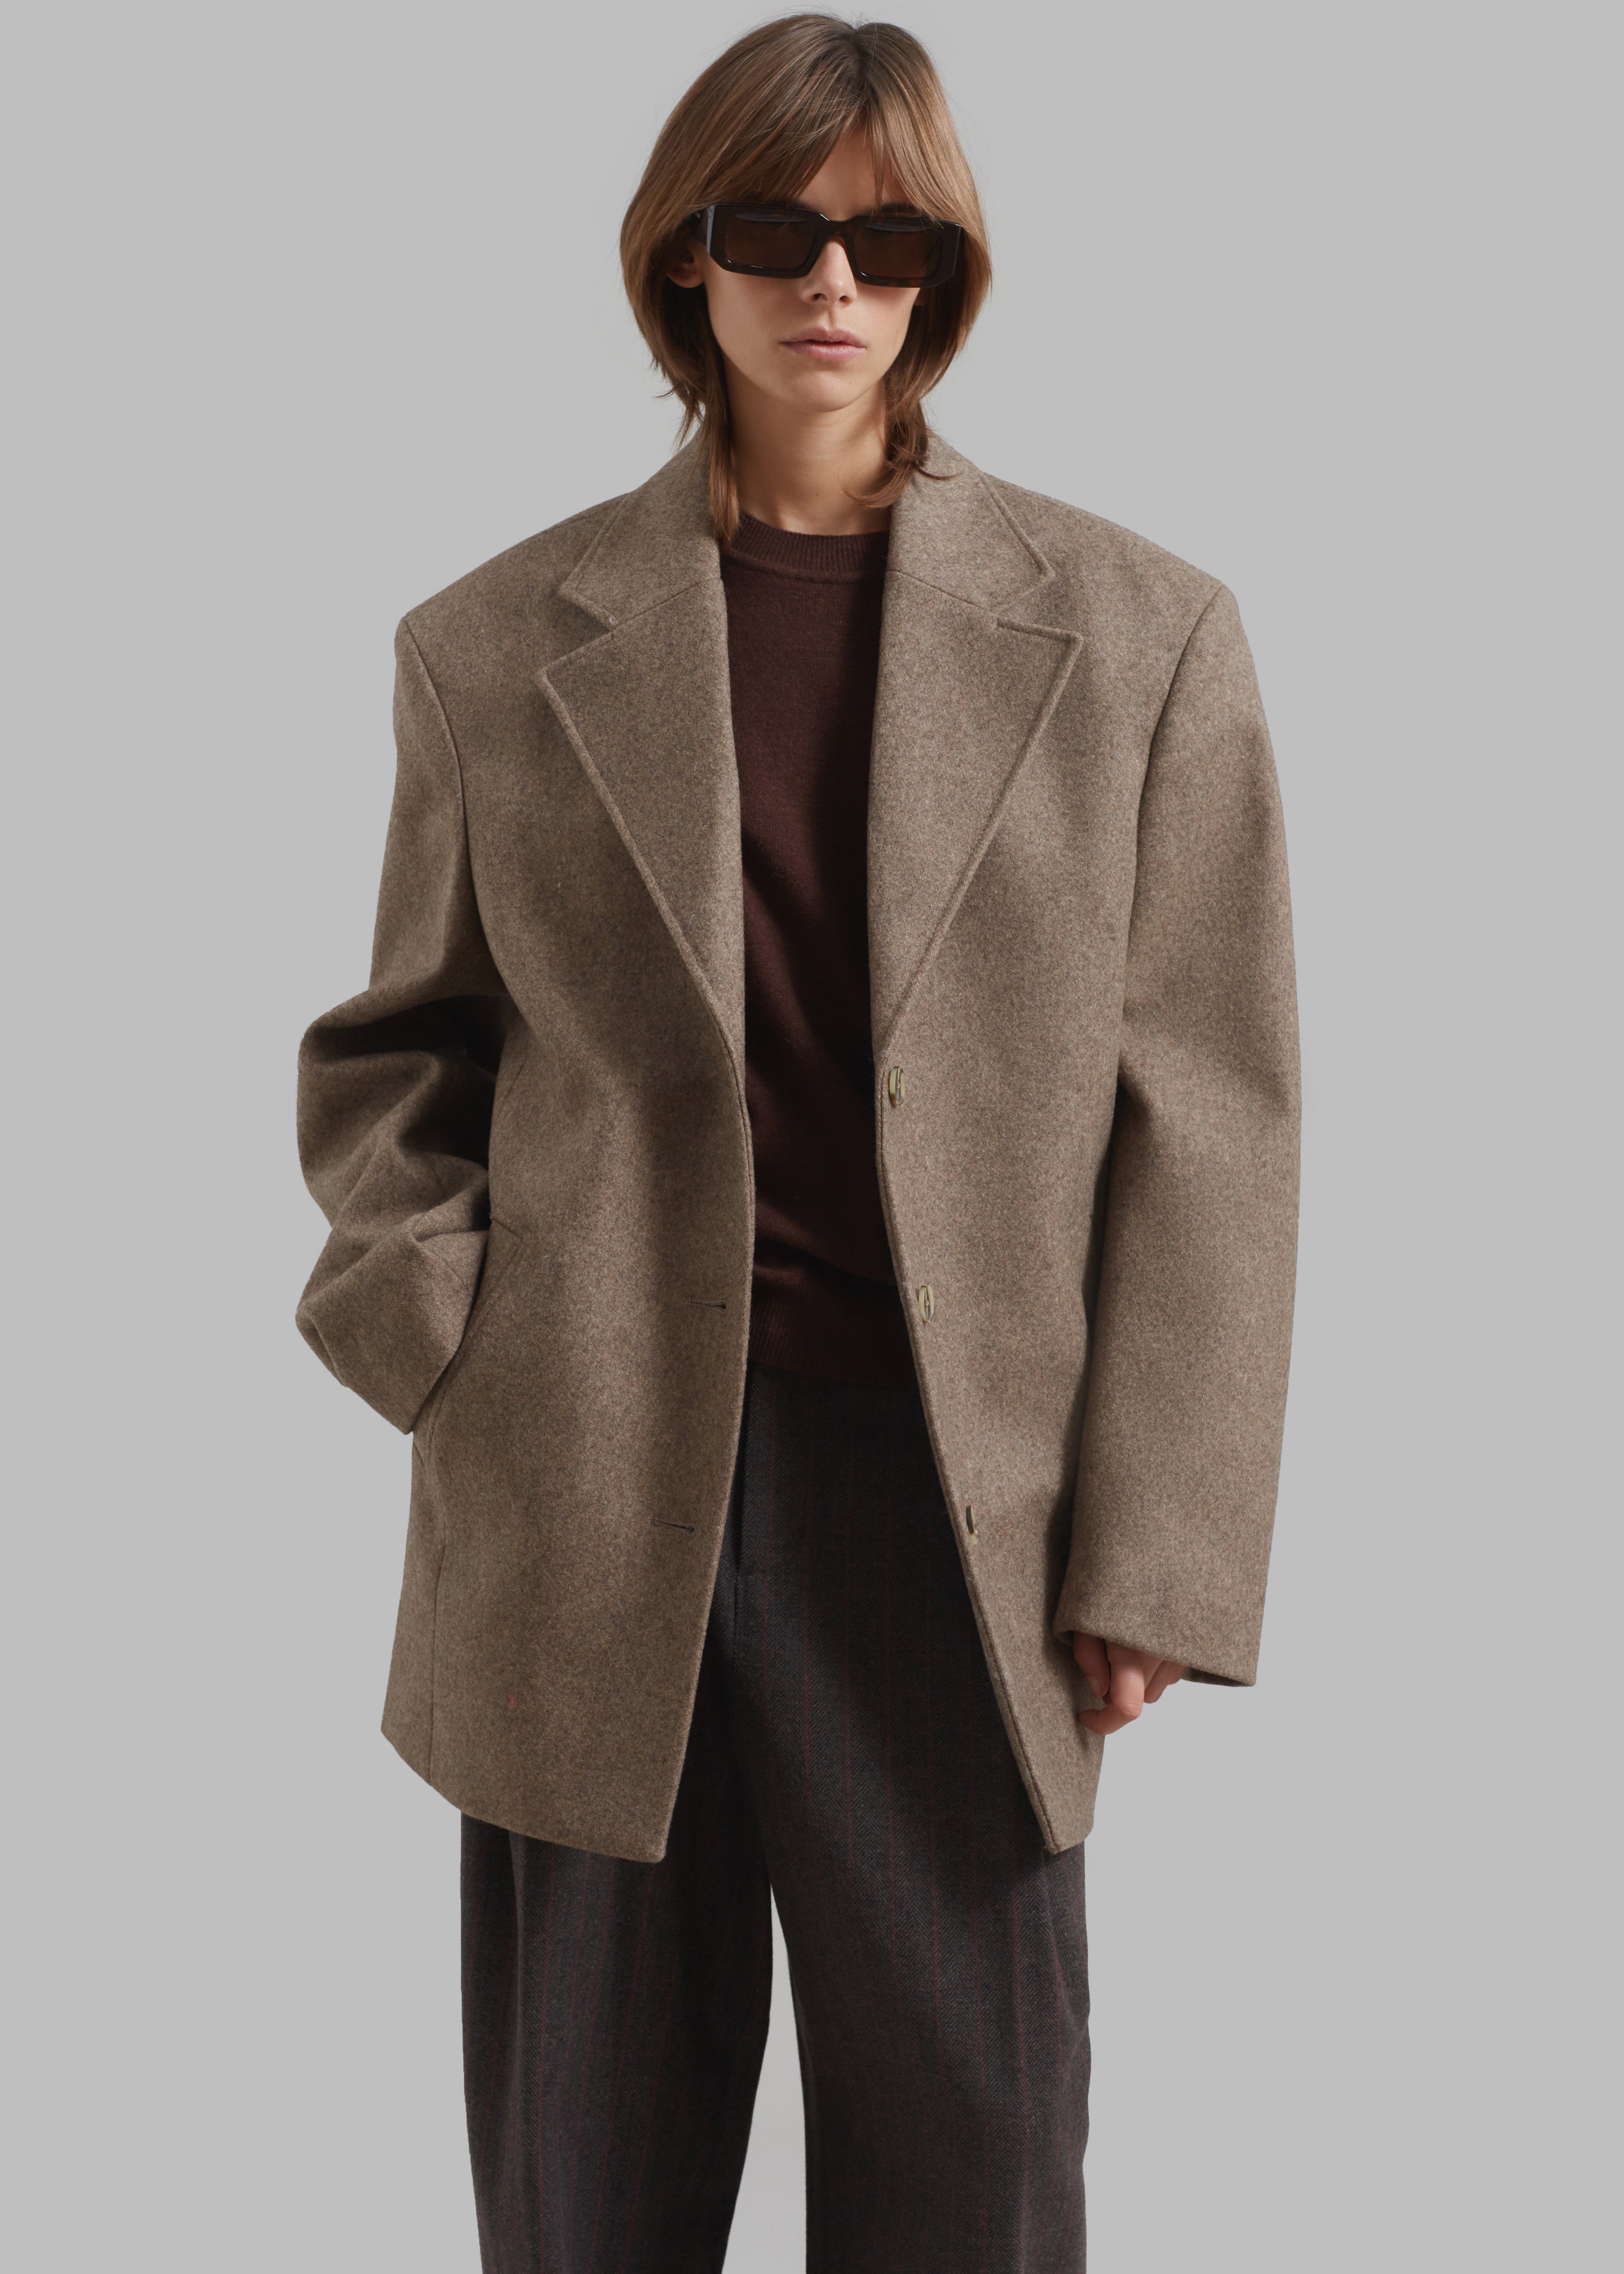 REMAIN Wool Boxy Jacket - Otter – The Frankie Shop